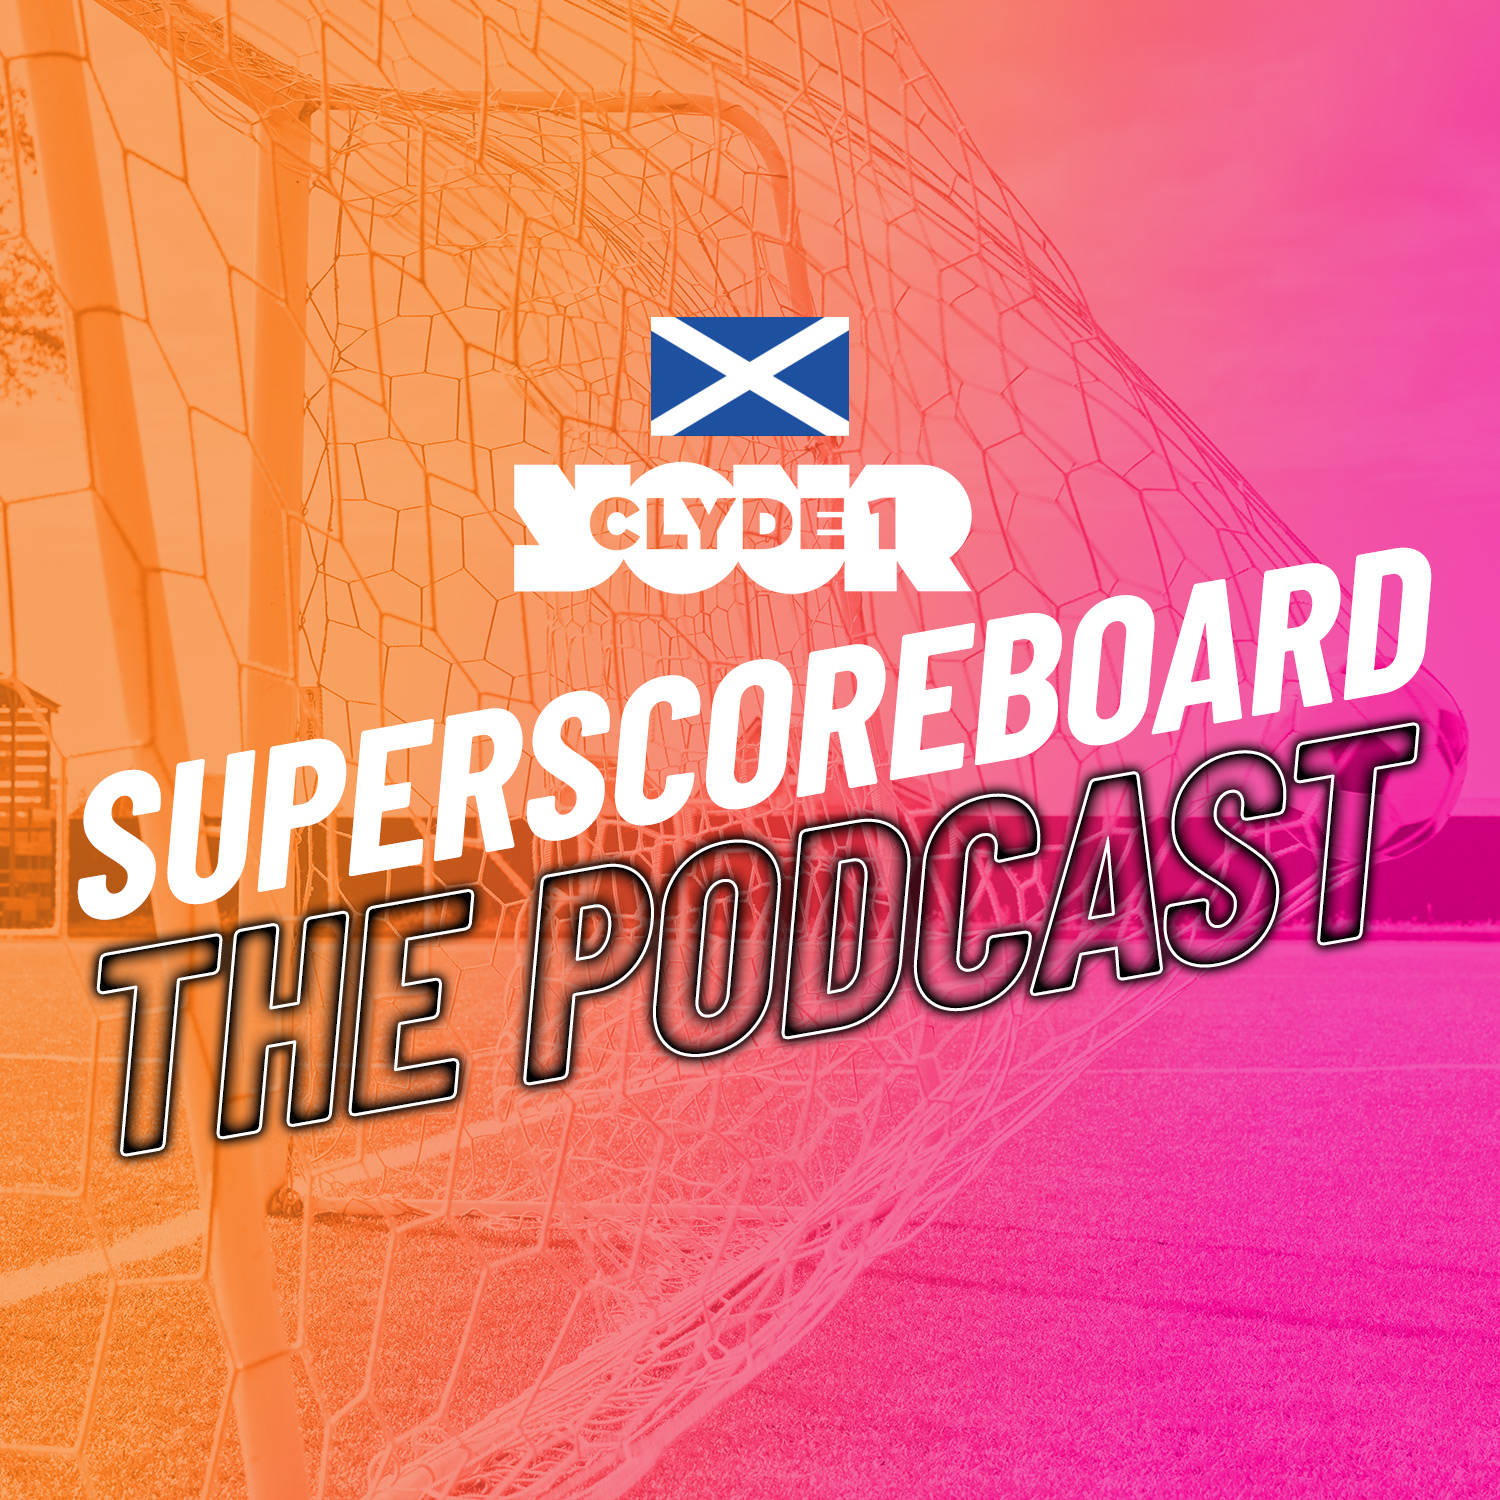 Monday 18th March Clyde 1 Superscoreboard